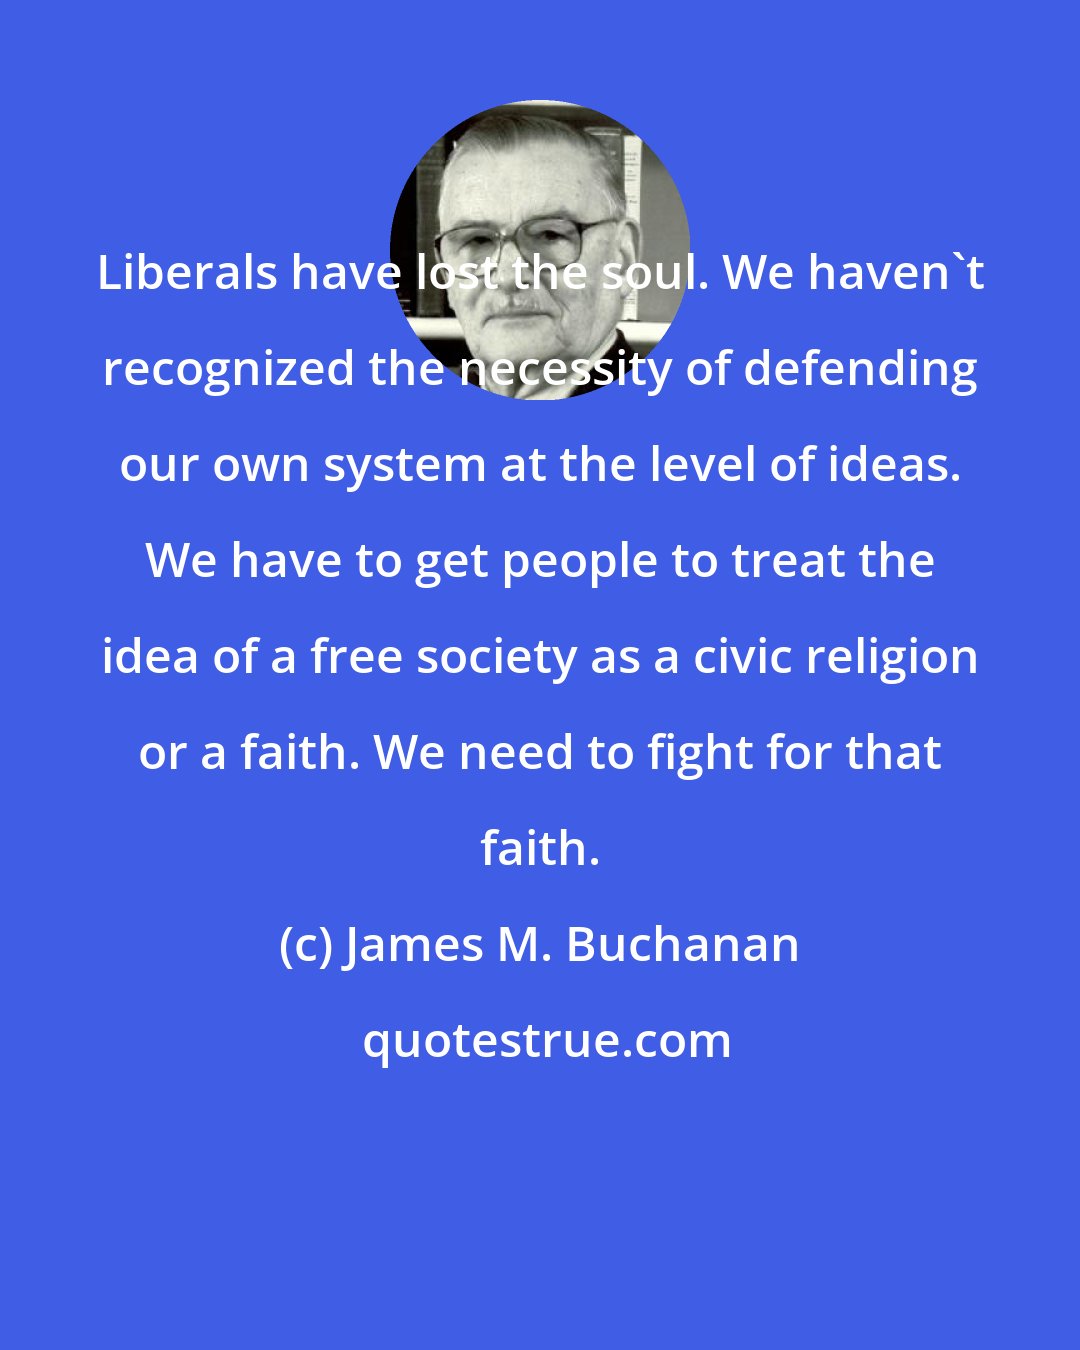 James M. Buchanan: Liberals have lost the soul. We haven't recognized the necessity of defending our own system at the level of ideas. We have to get people to treat the idea of a free society as a civic religion or a faith. We need to fight for that faith.